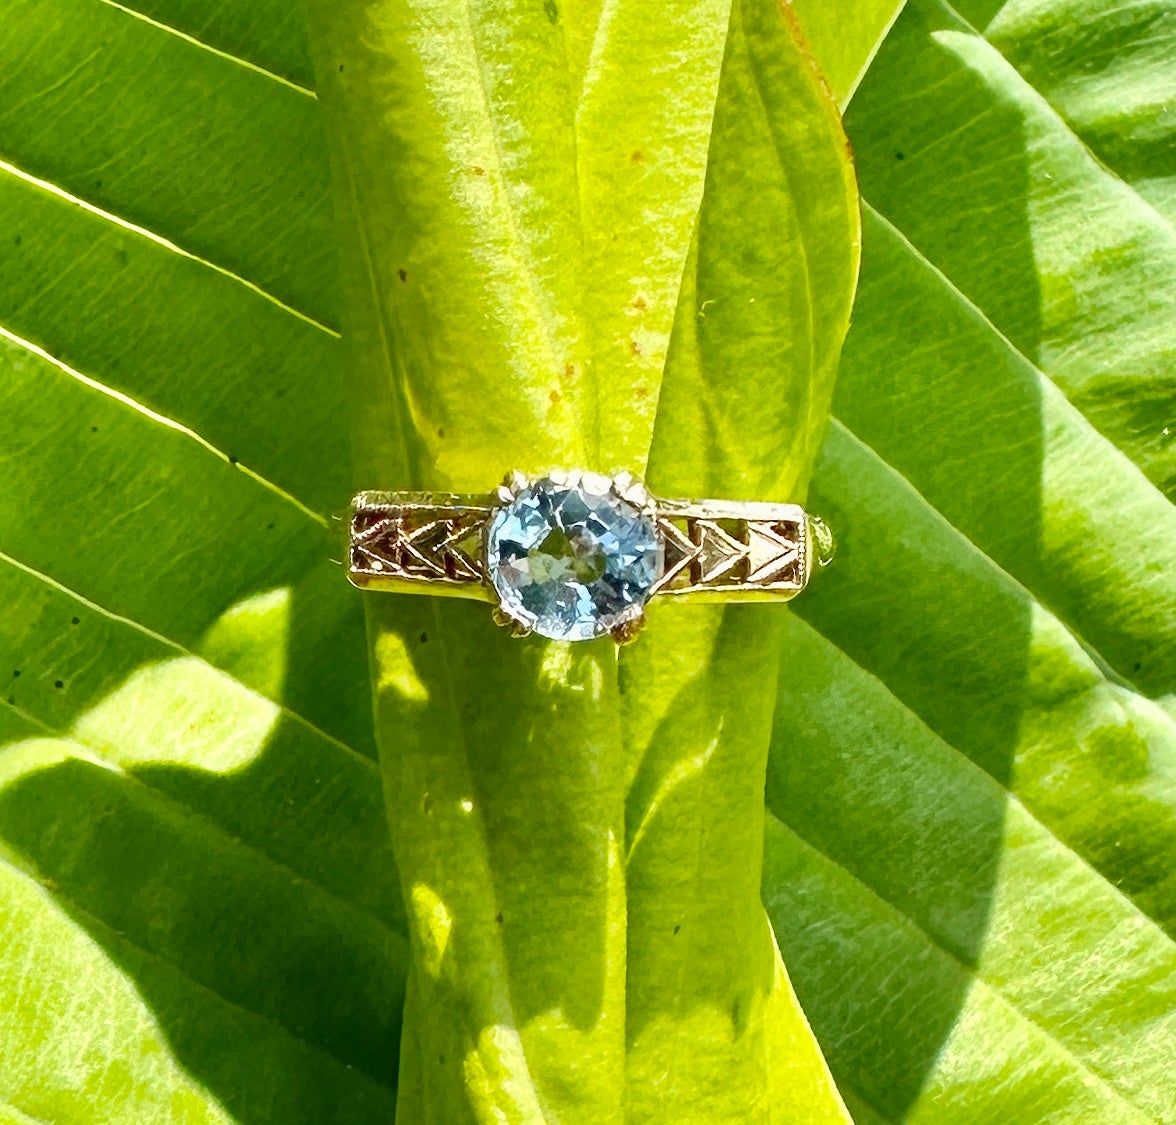 This is a stunning Art Deco 1 Carat Round Brilliant Cut Aquamarine Solitaire Wedding Engagement Stacking Ring in a 10 Karat Yellow Gold ornate open work setting of great beauty.  The ring has a gorgeous Aquamarine gem with lovely Aquamarine blue